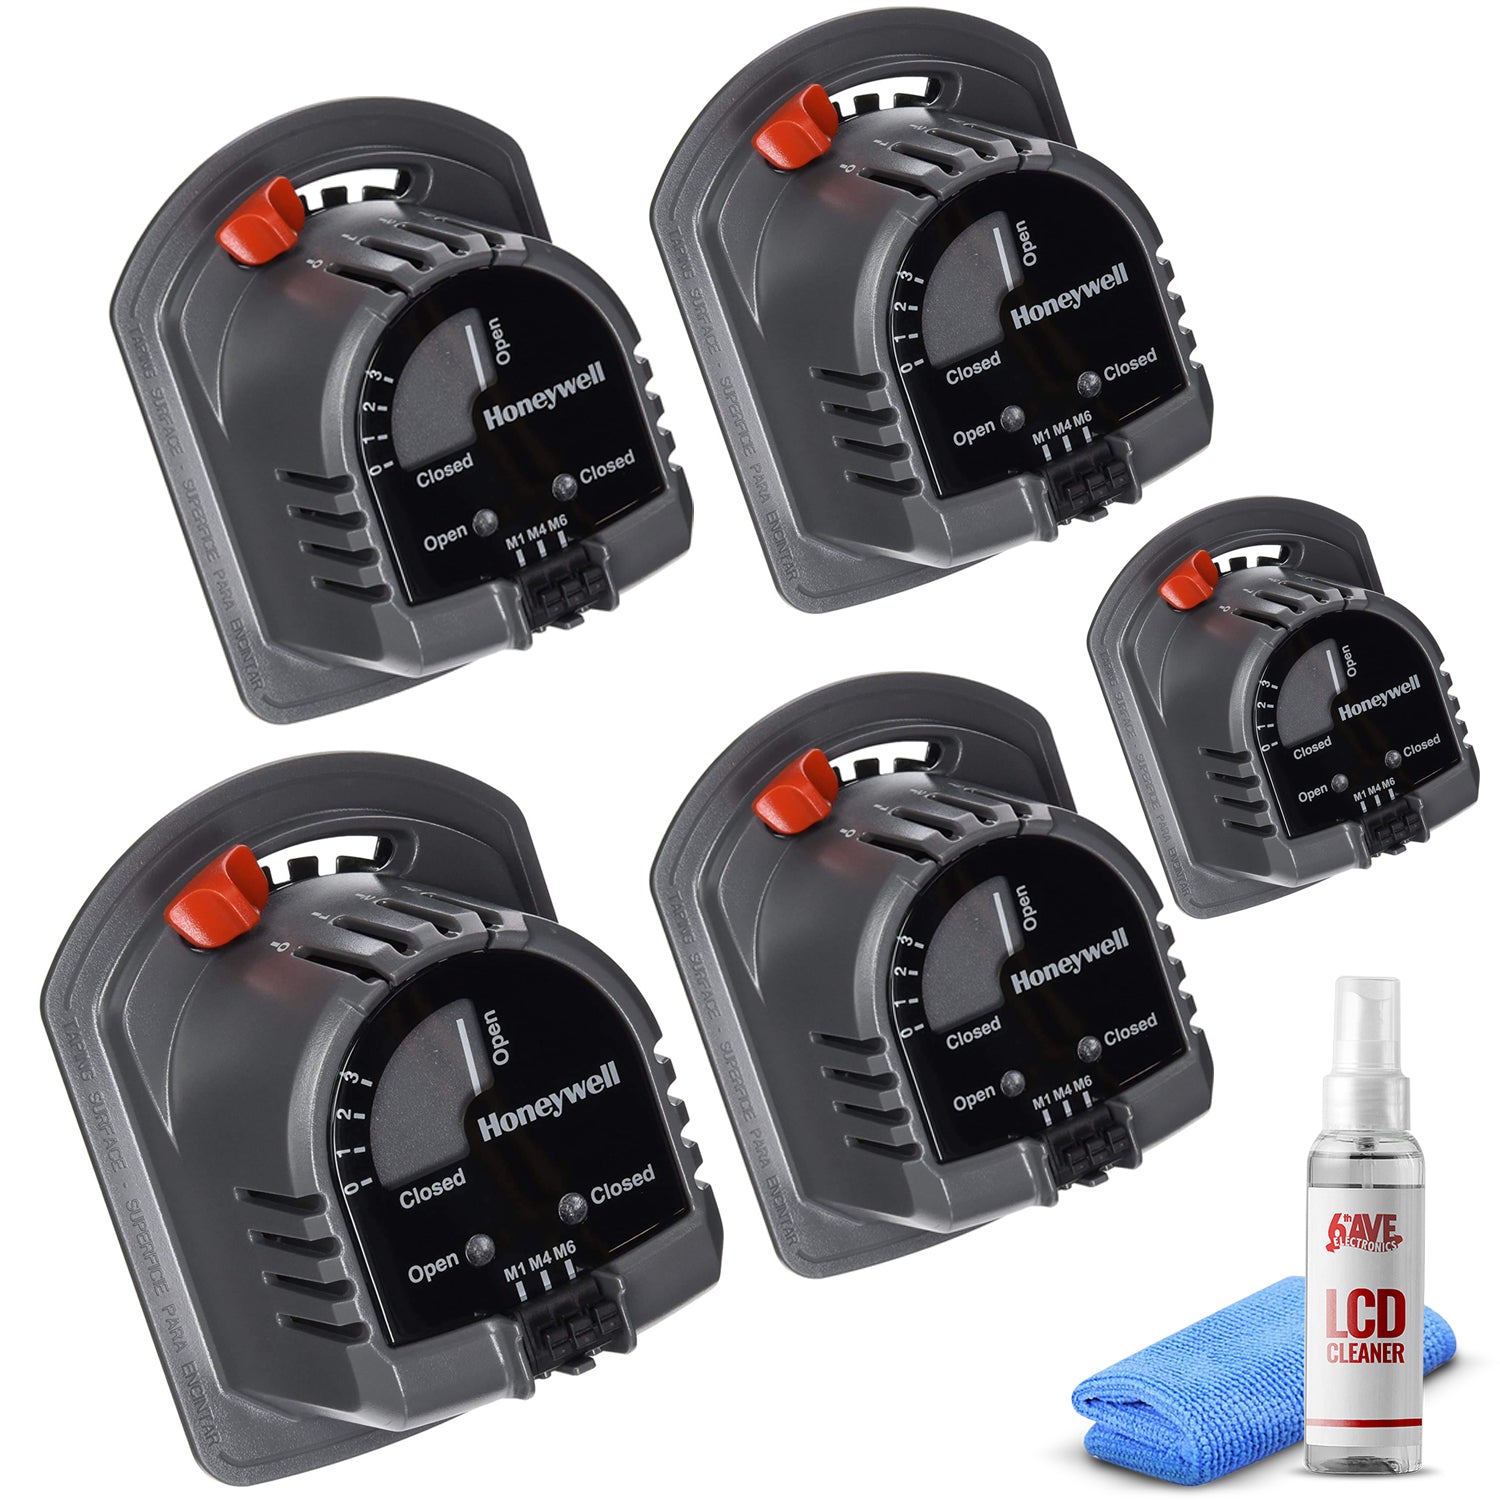 5-Pack Honeywell Replacement Motor for Ard and Zd Zone Dampers 24V + LCD Cleaner